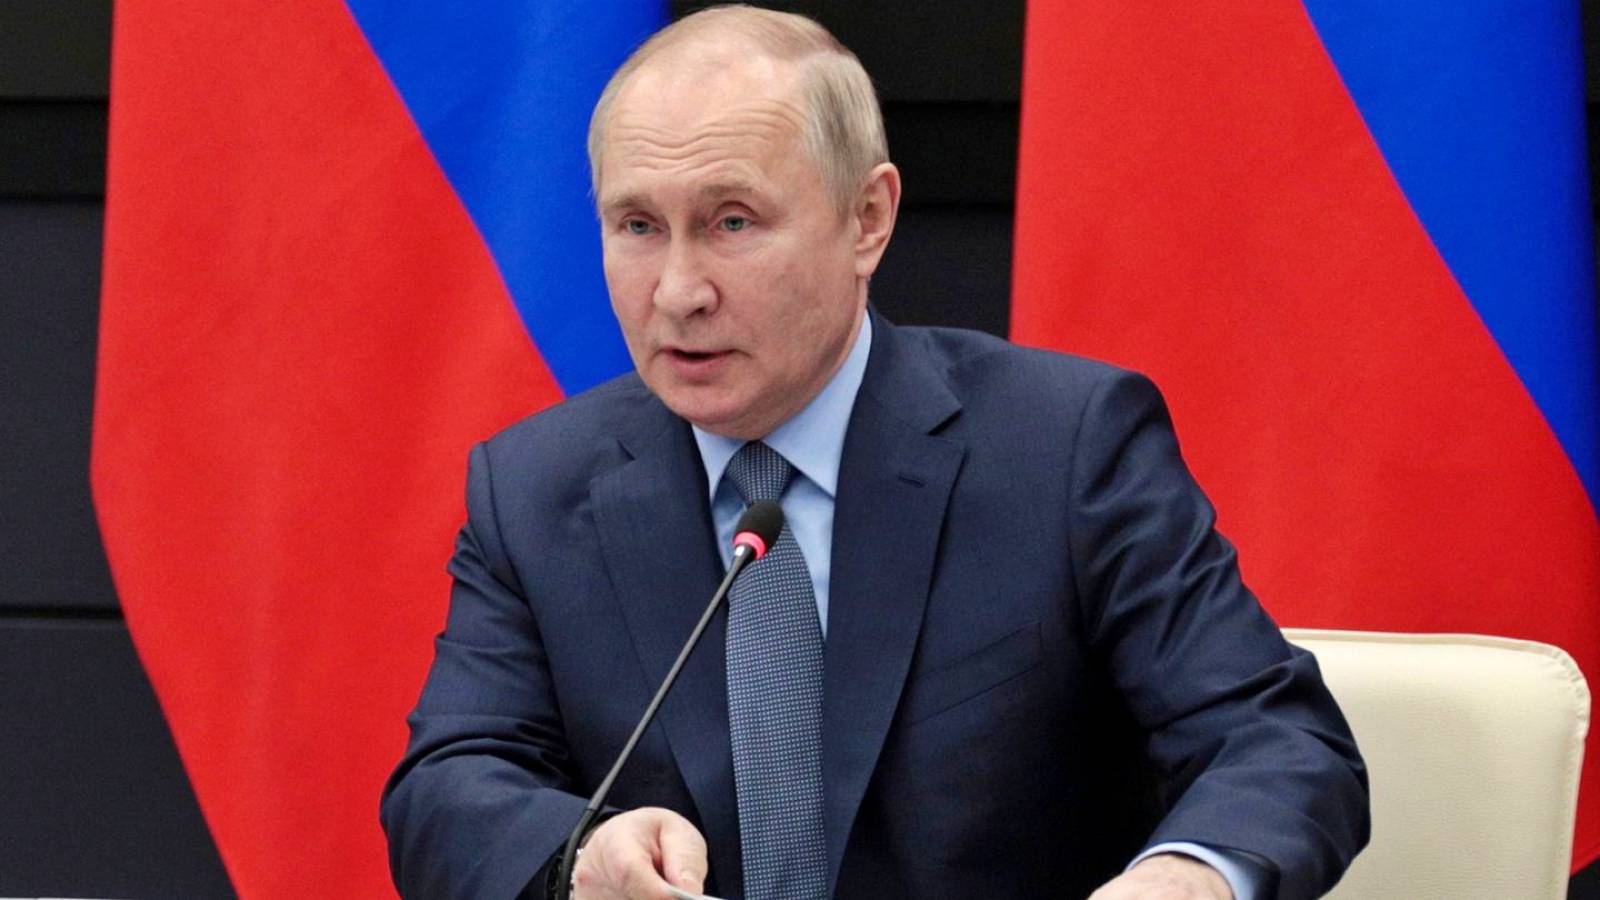 Vladimir Putin Attacks the West, Accusing Russia of Forcing it to Invade Ukraine